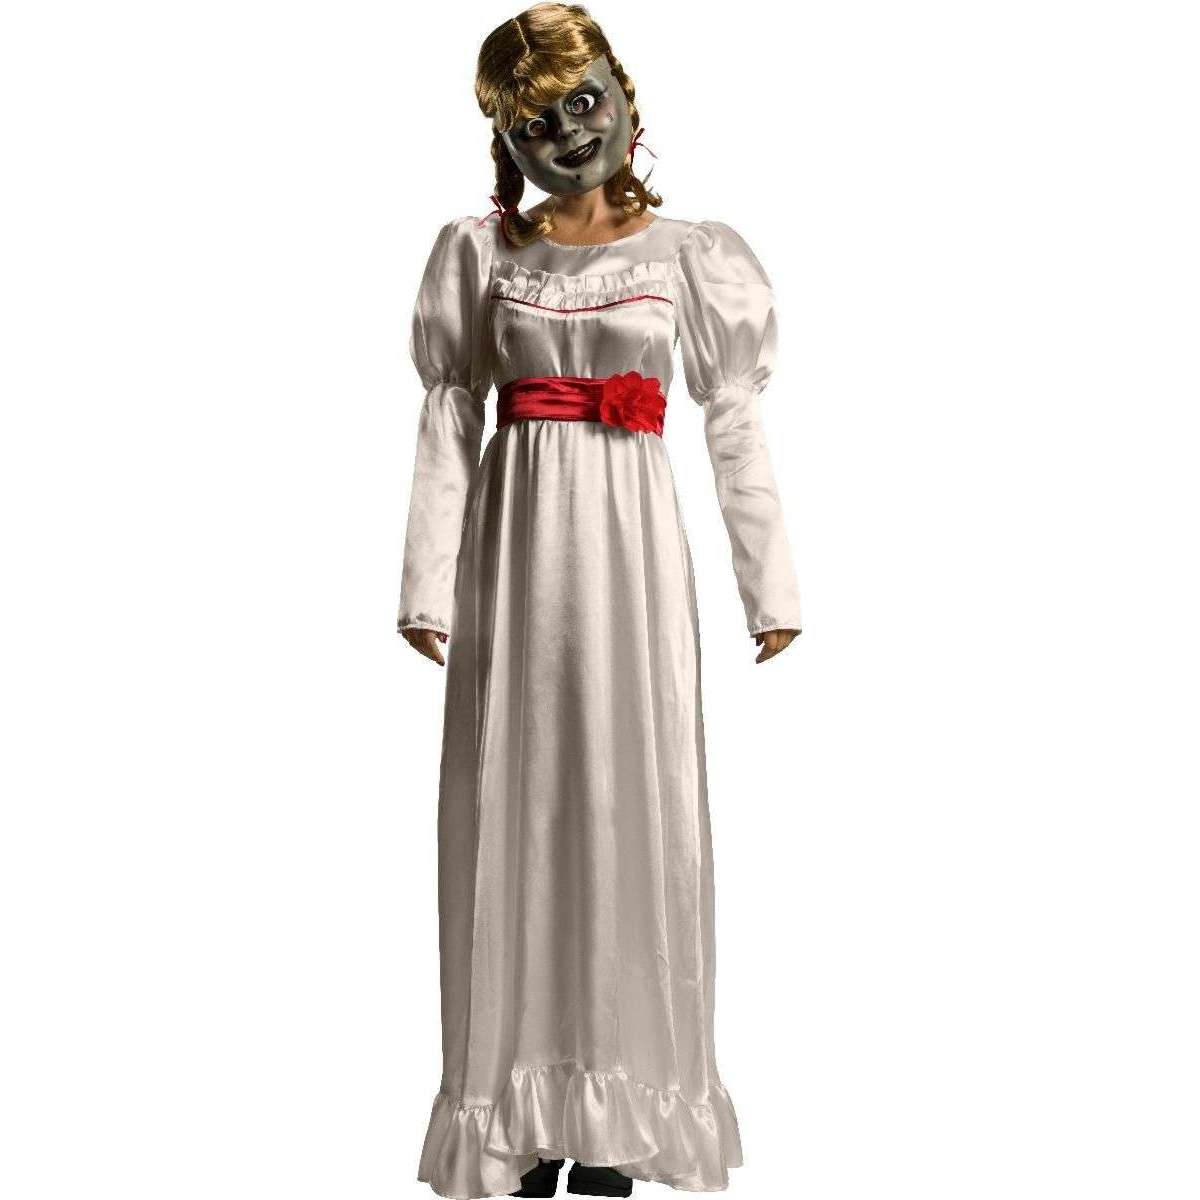 Annabelle Comes Home Adult Costume w/ Vaccum Form Mask